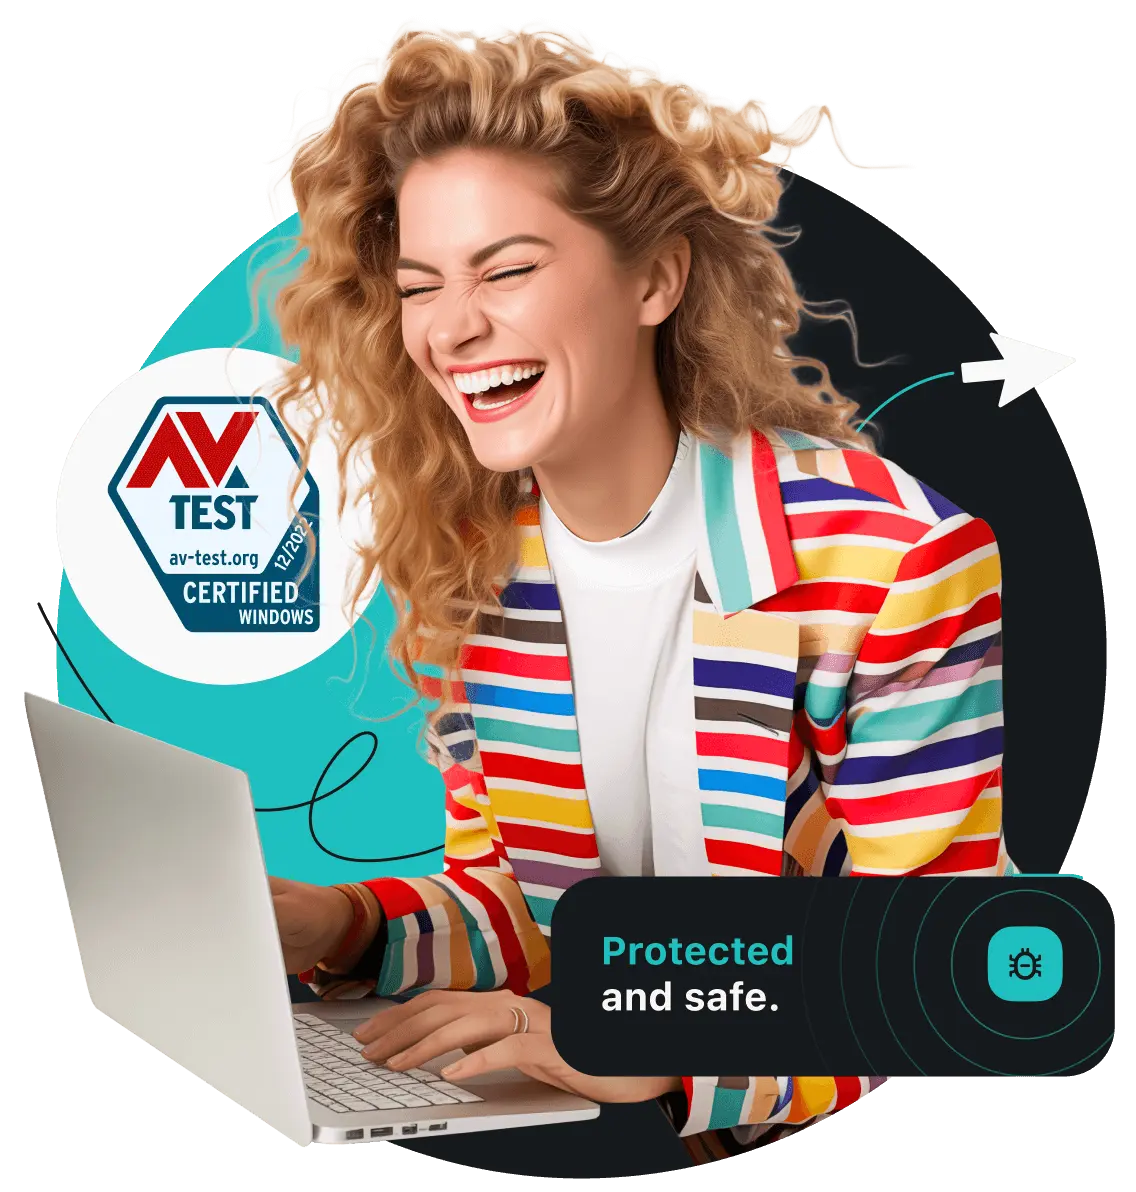 A laughing woman in a colored striped jacket is browsing on her laptop. AV test certification badge is on her left.